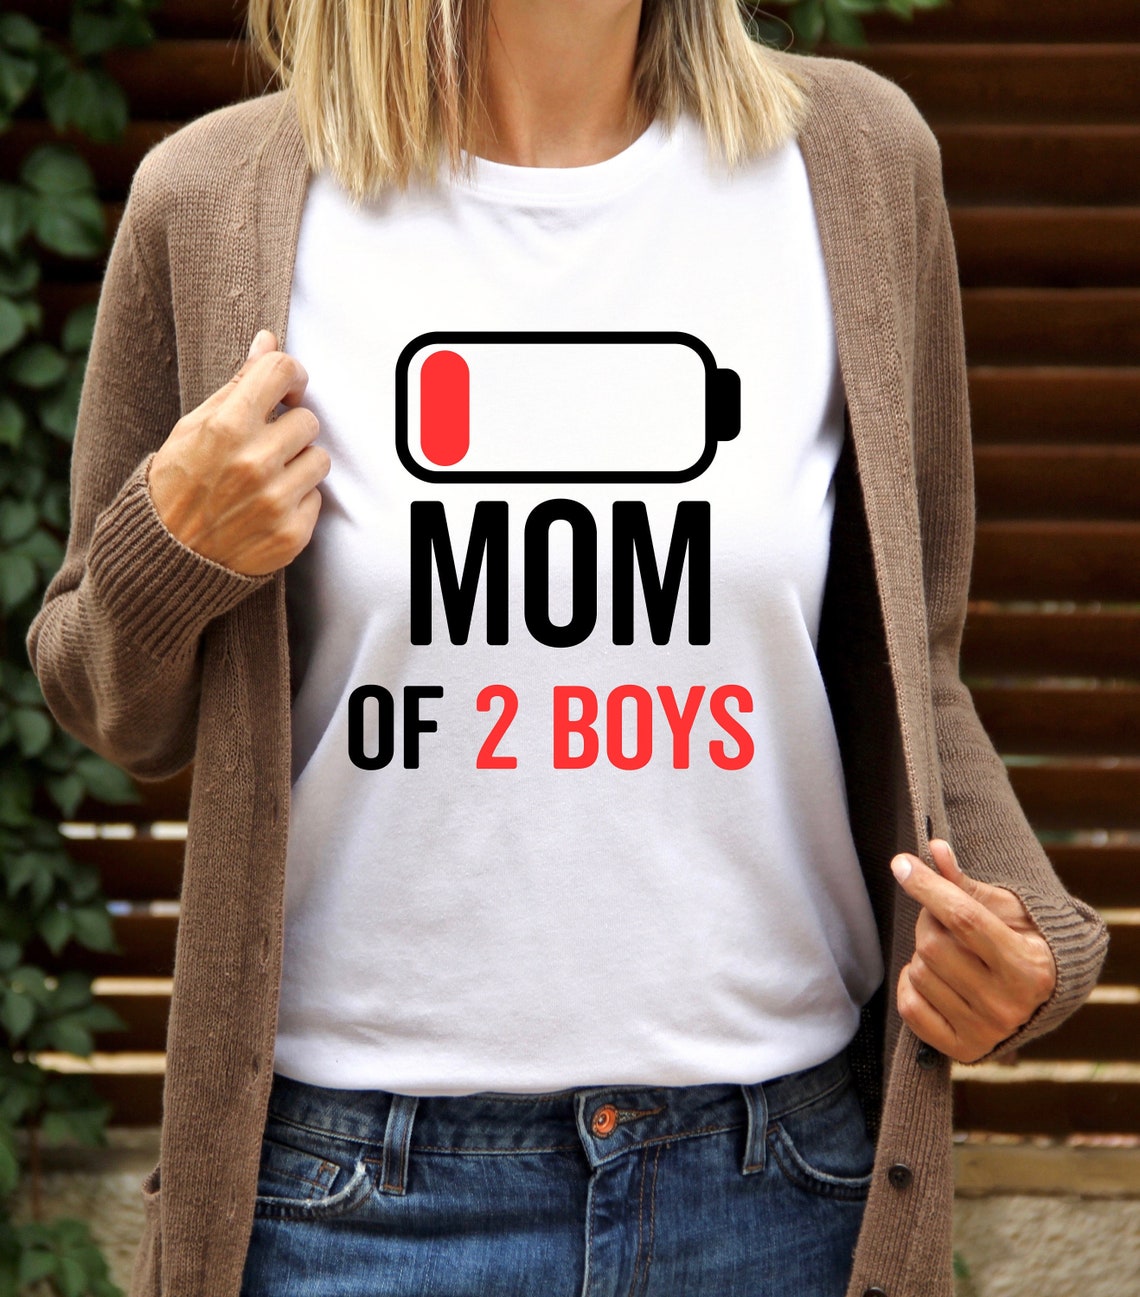 Mom of 2 Boys Shirt Gift from Son